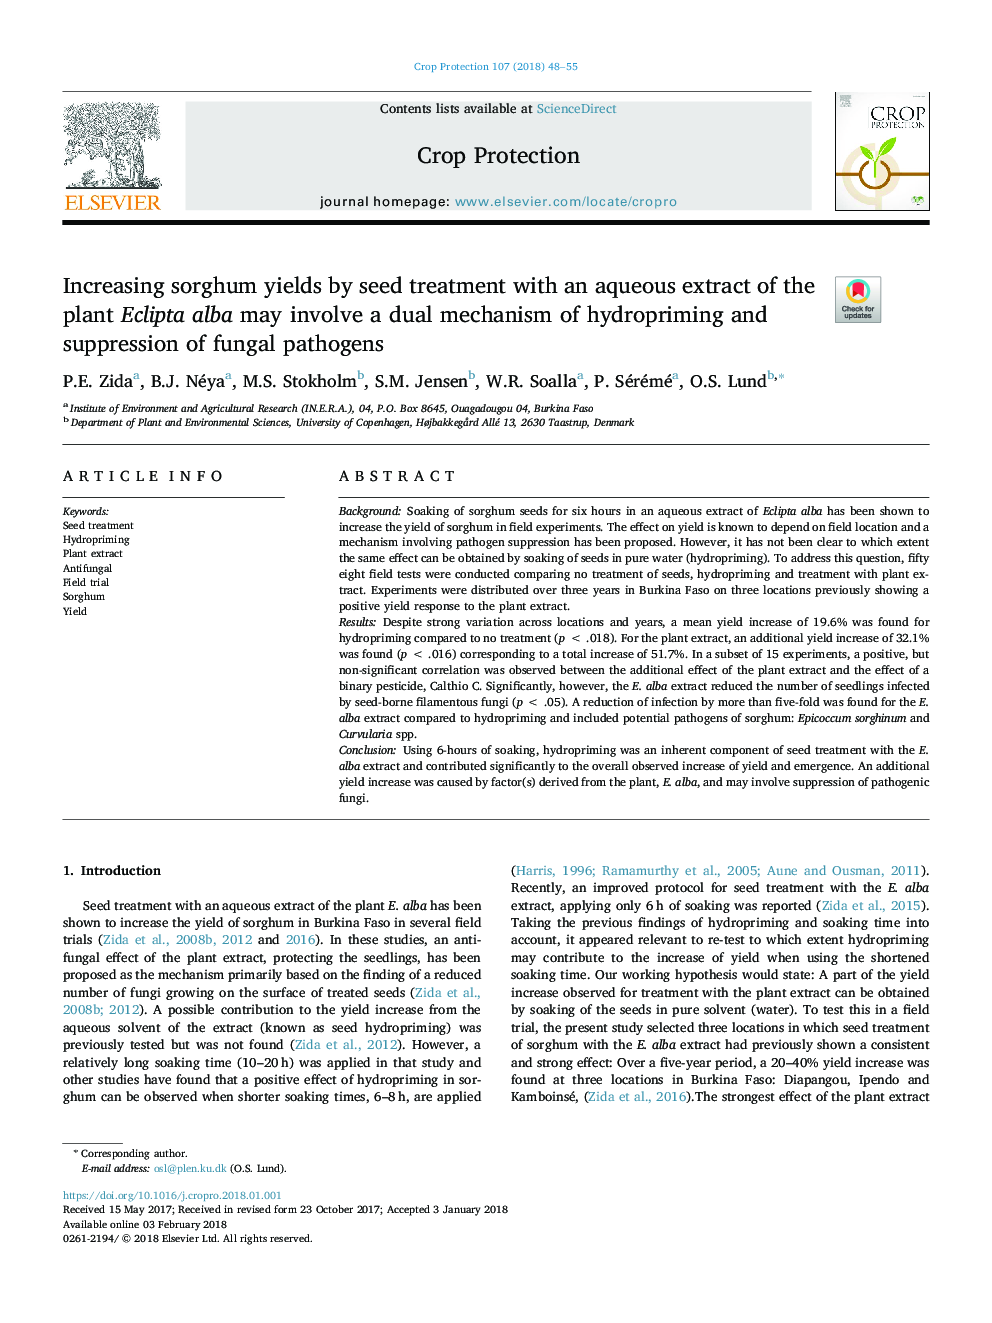 Increasing sorghum yields by seed treatment with an aqueous extract of the plant Eclipta alba may involve a dual mechanism of hydropriming and suppression of fungal pathogens